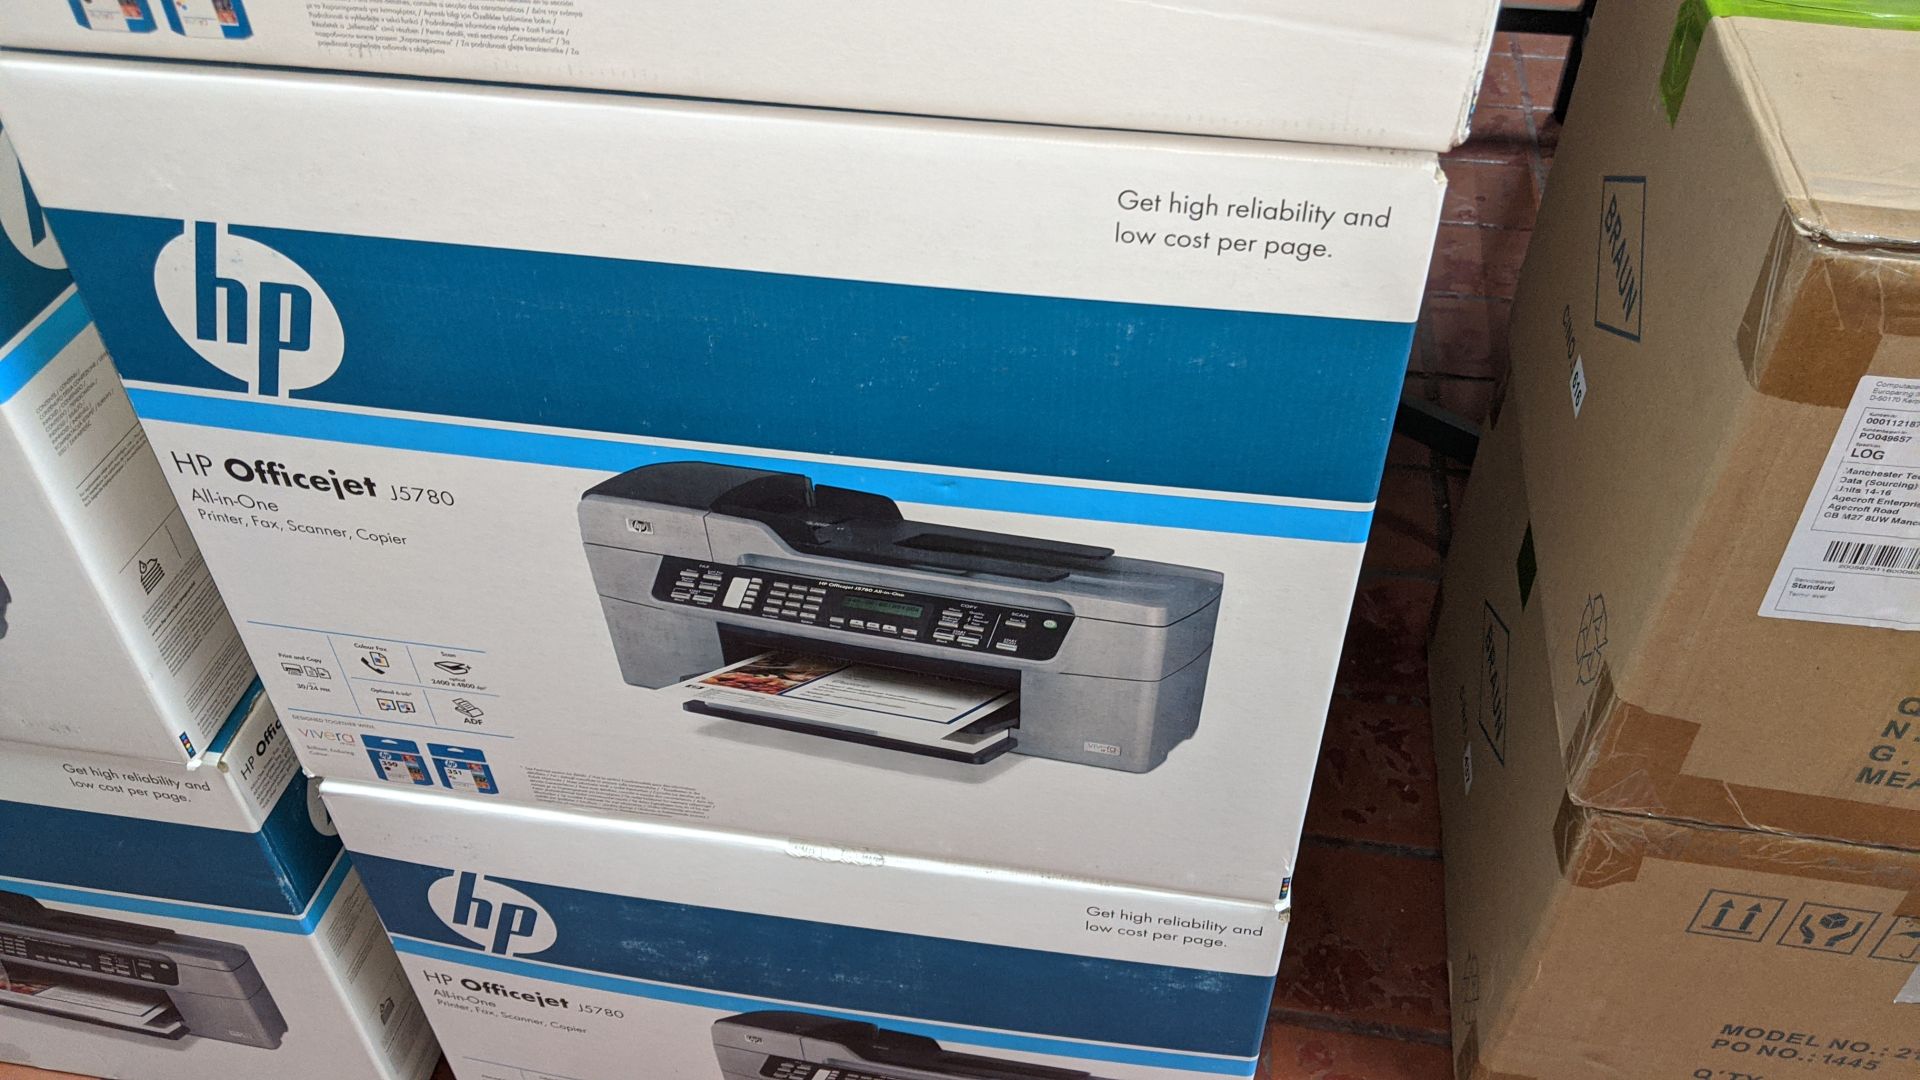 6 off HP OfficeJet J5780 combination printer fax scanner copiers. This is one of a large number of - Image 3 of 4